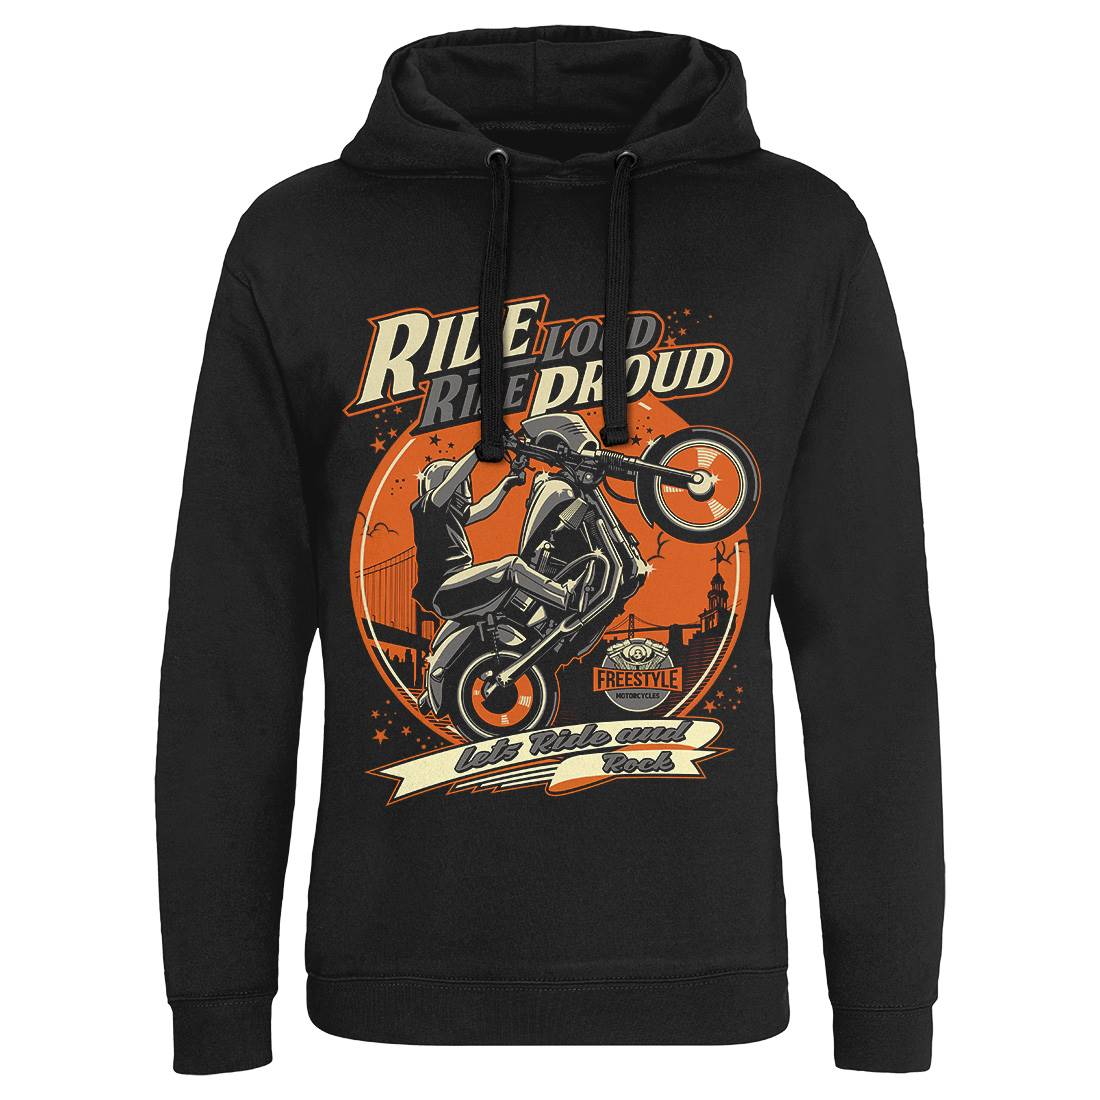 Ride Proud Mens Hoodie Without Pocket Motorcycles D070